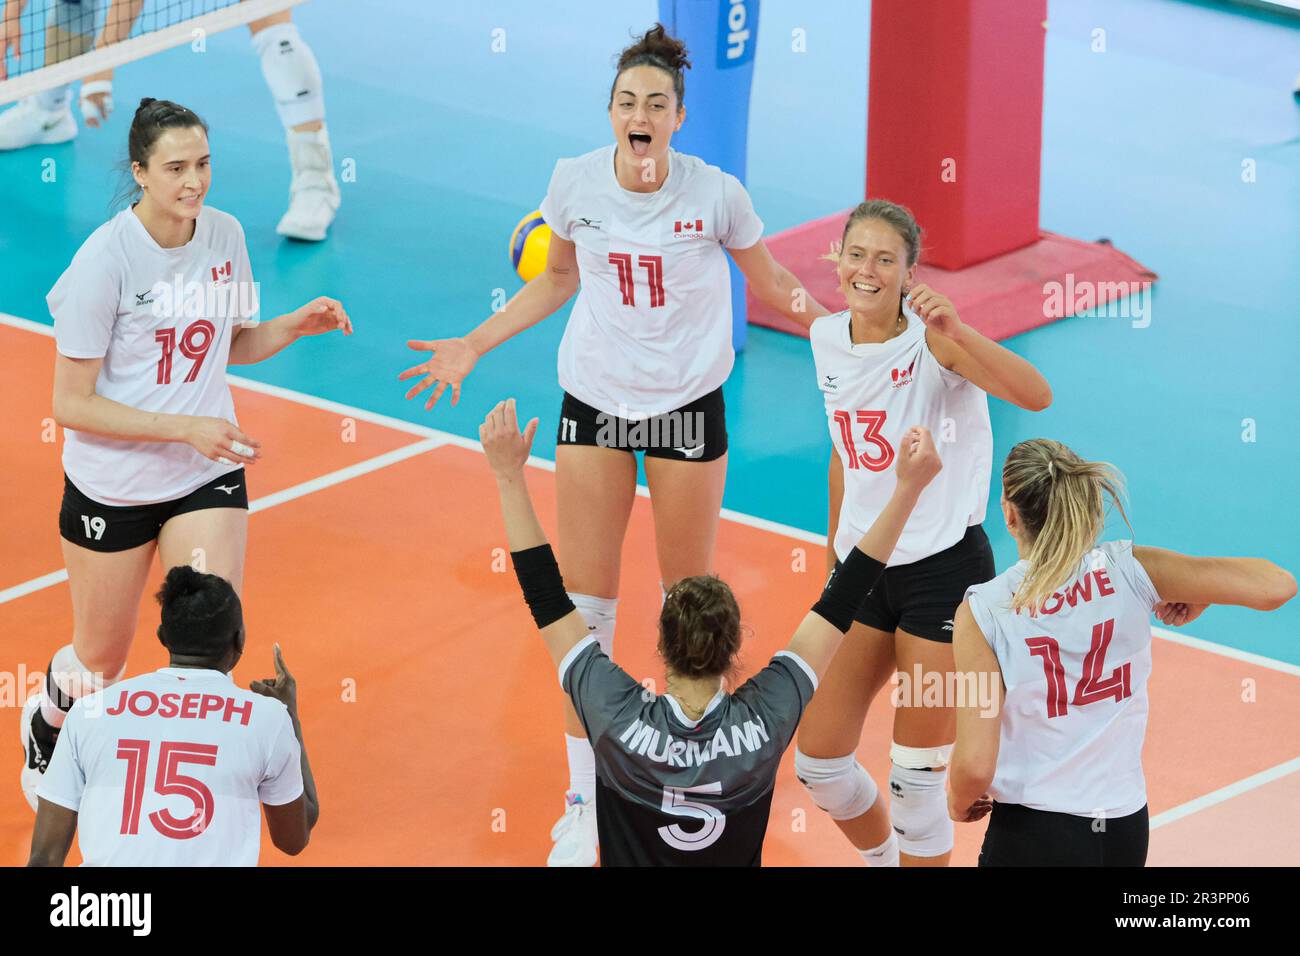 The Canada's team celebrates during the DHL Test Match Tournament women’s volleyball between Italy and Canada in Lanciano. Italian national team beats Canada with a score 3-1 Stock Photo